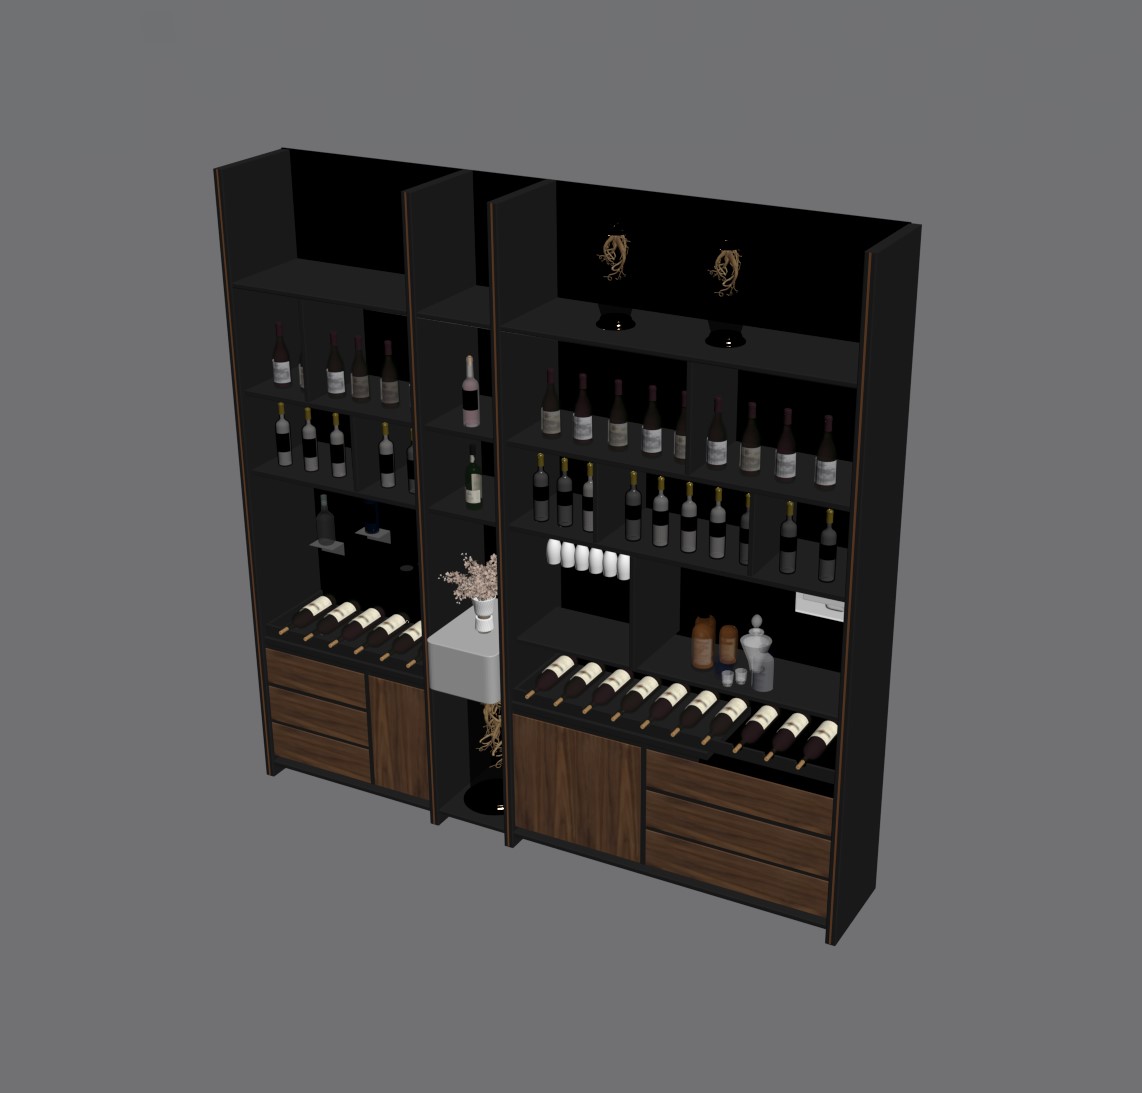 10270. Download Free Wine Cabinet Model by Dung Dac